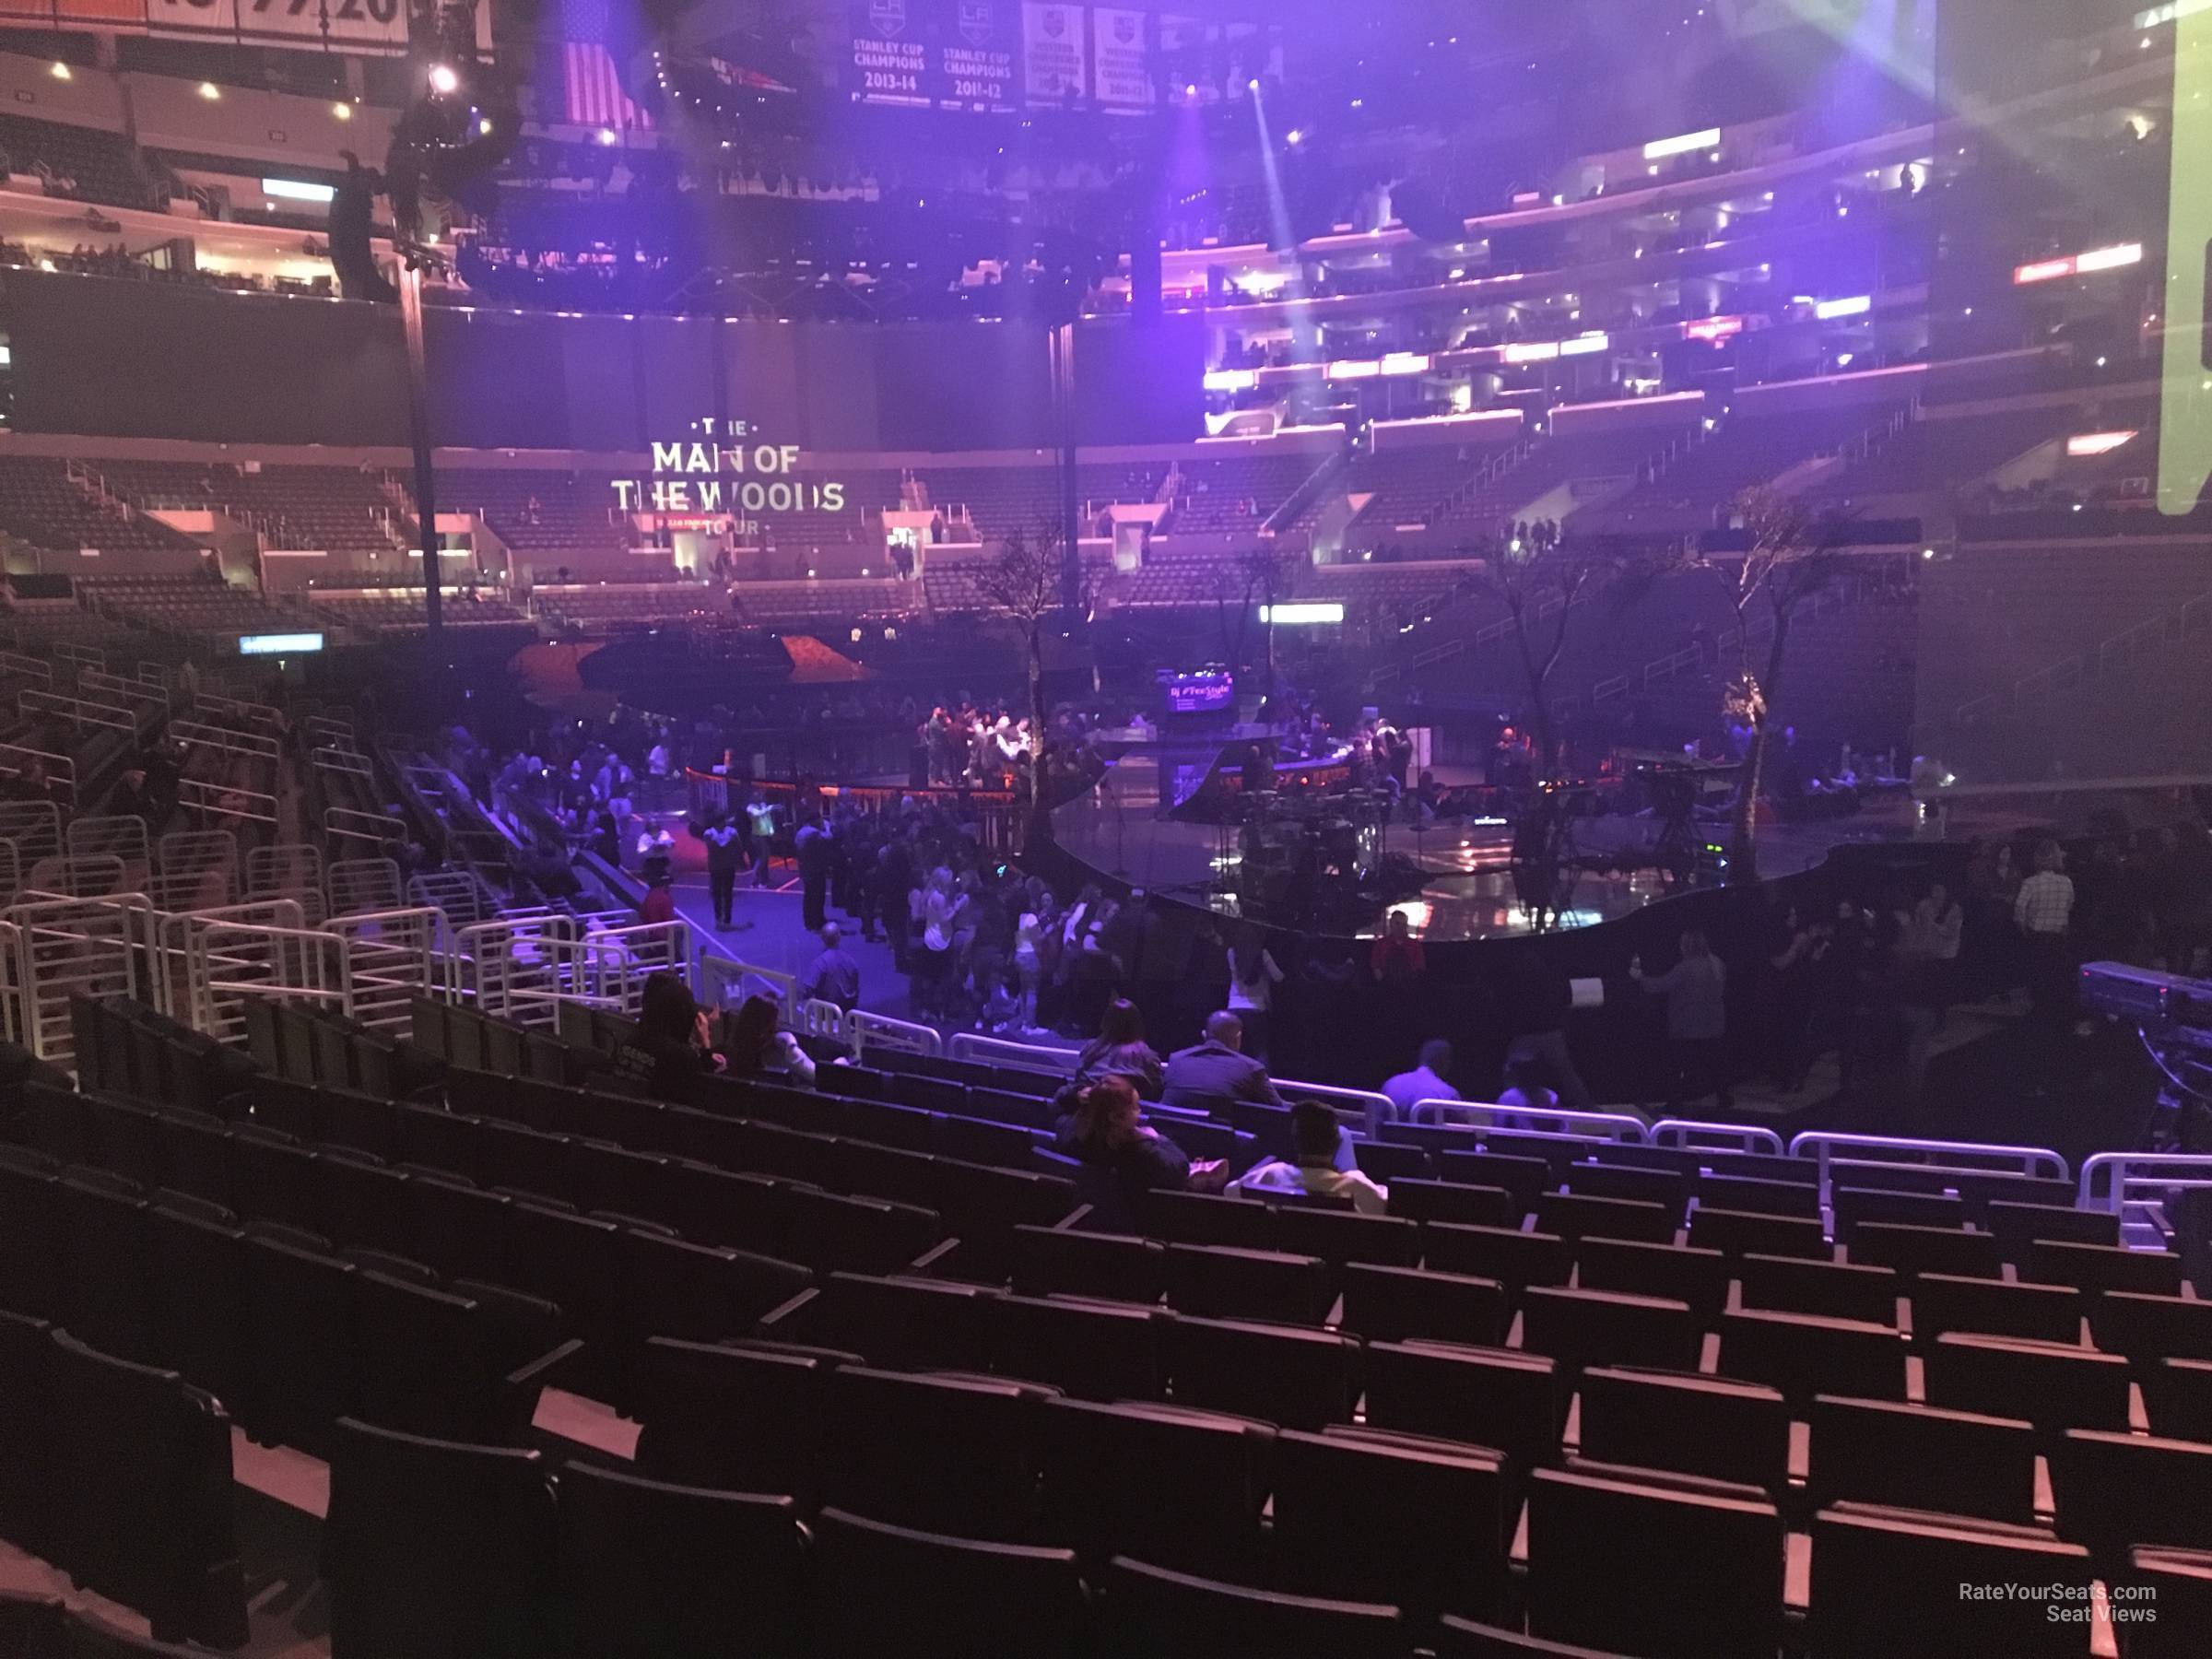 section 108, row 15 seat view  for concert - crypto.com arena